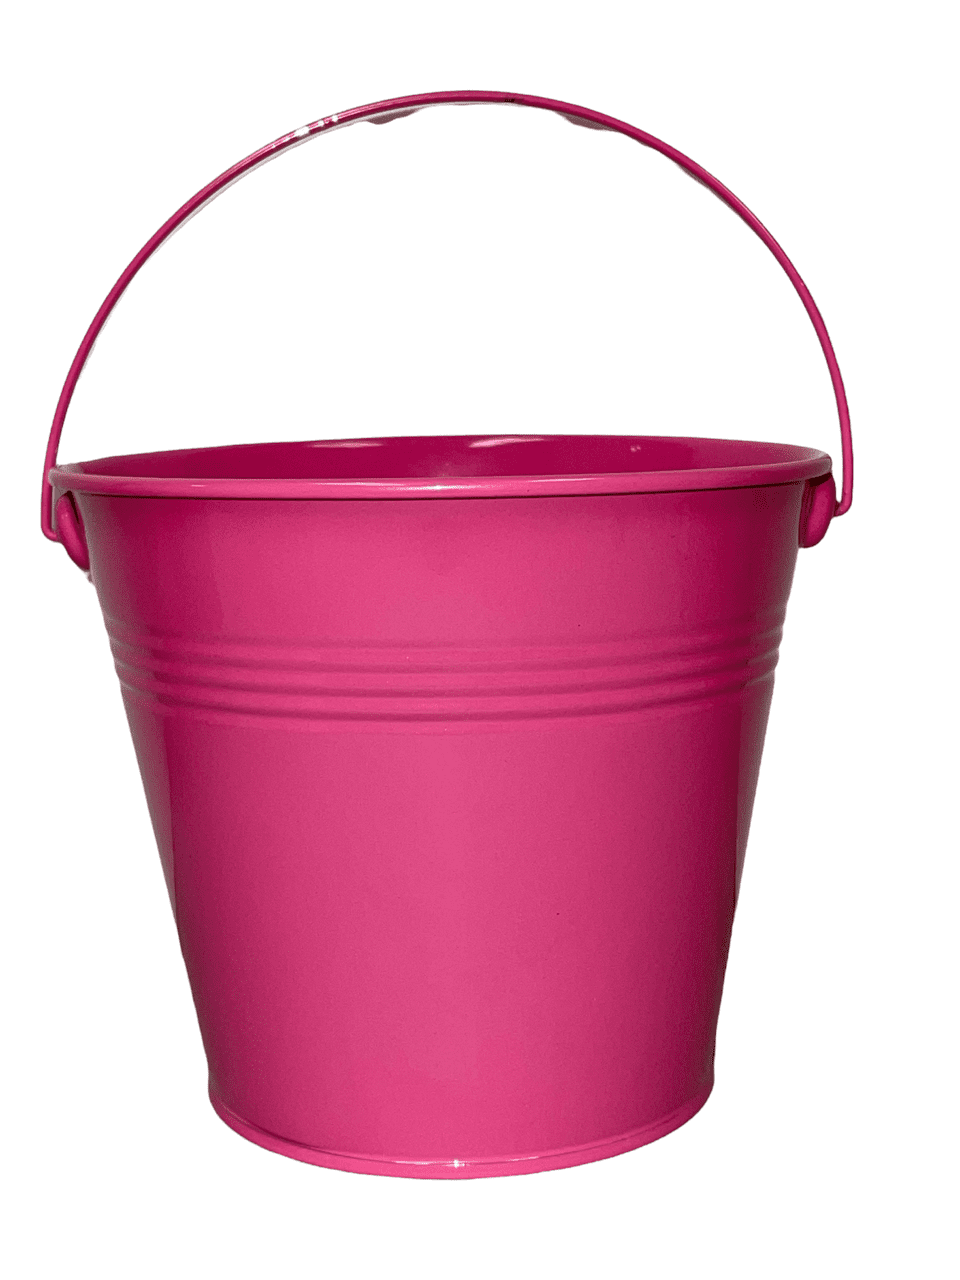 Charmed Colored Mini Metal Buckets - 3-Pack Colorful Tin Pails